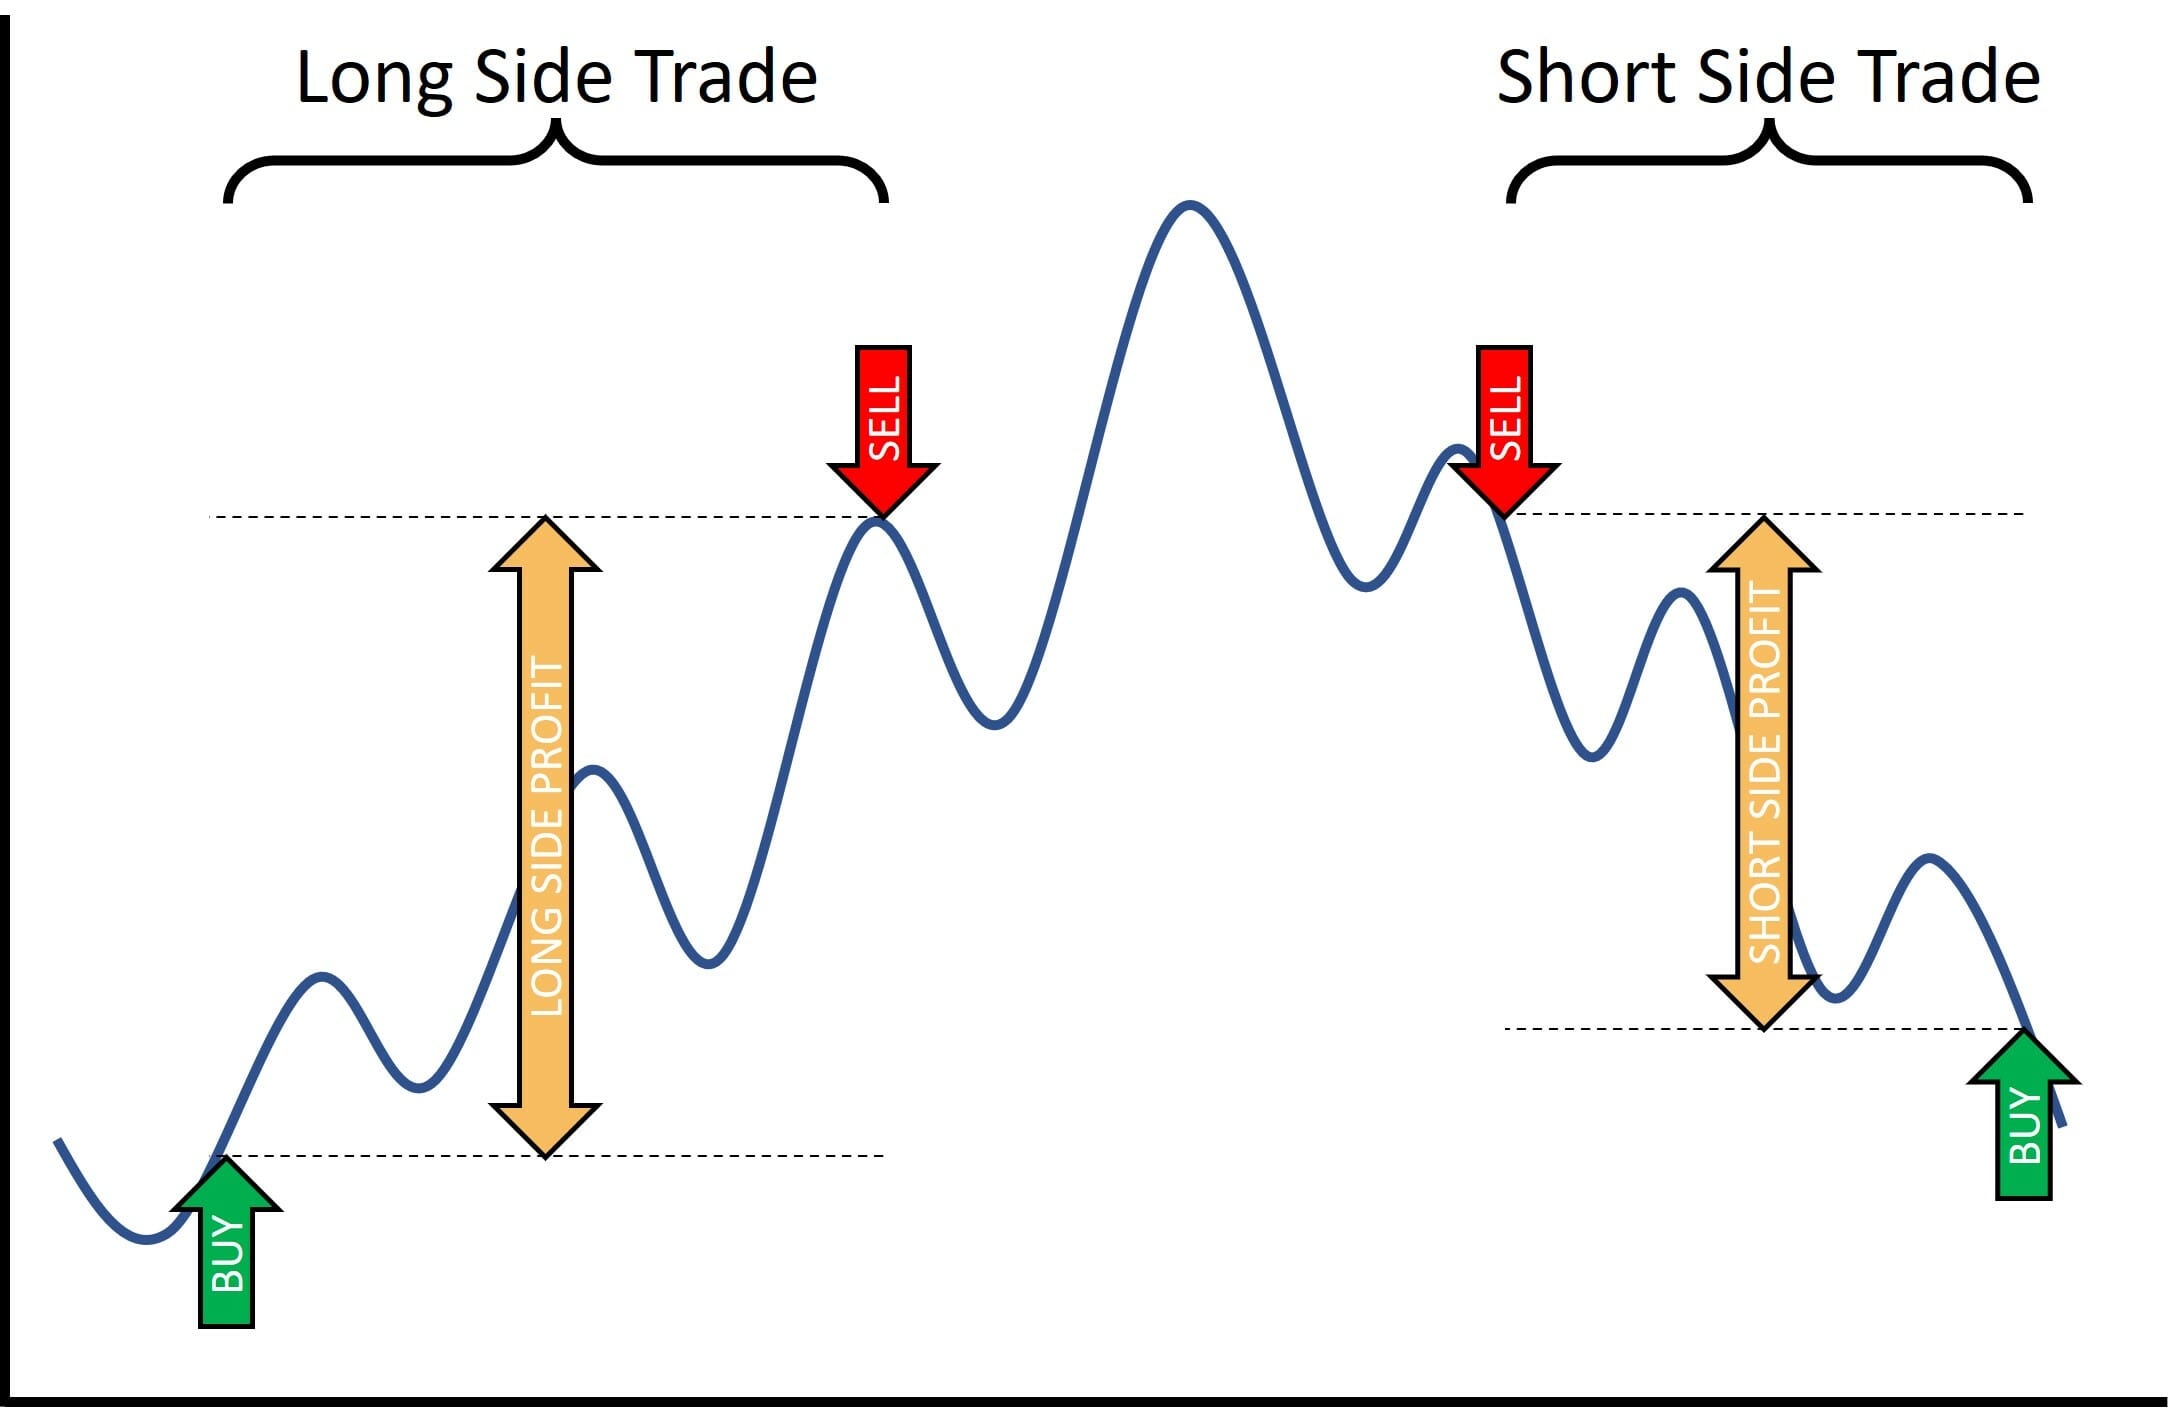 Short selling of stocks - what is short selling of stocks and how does it work